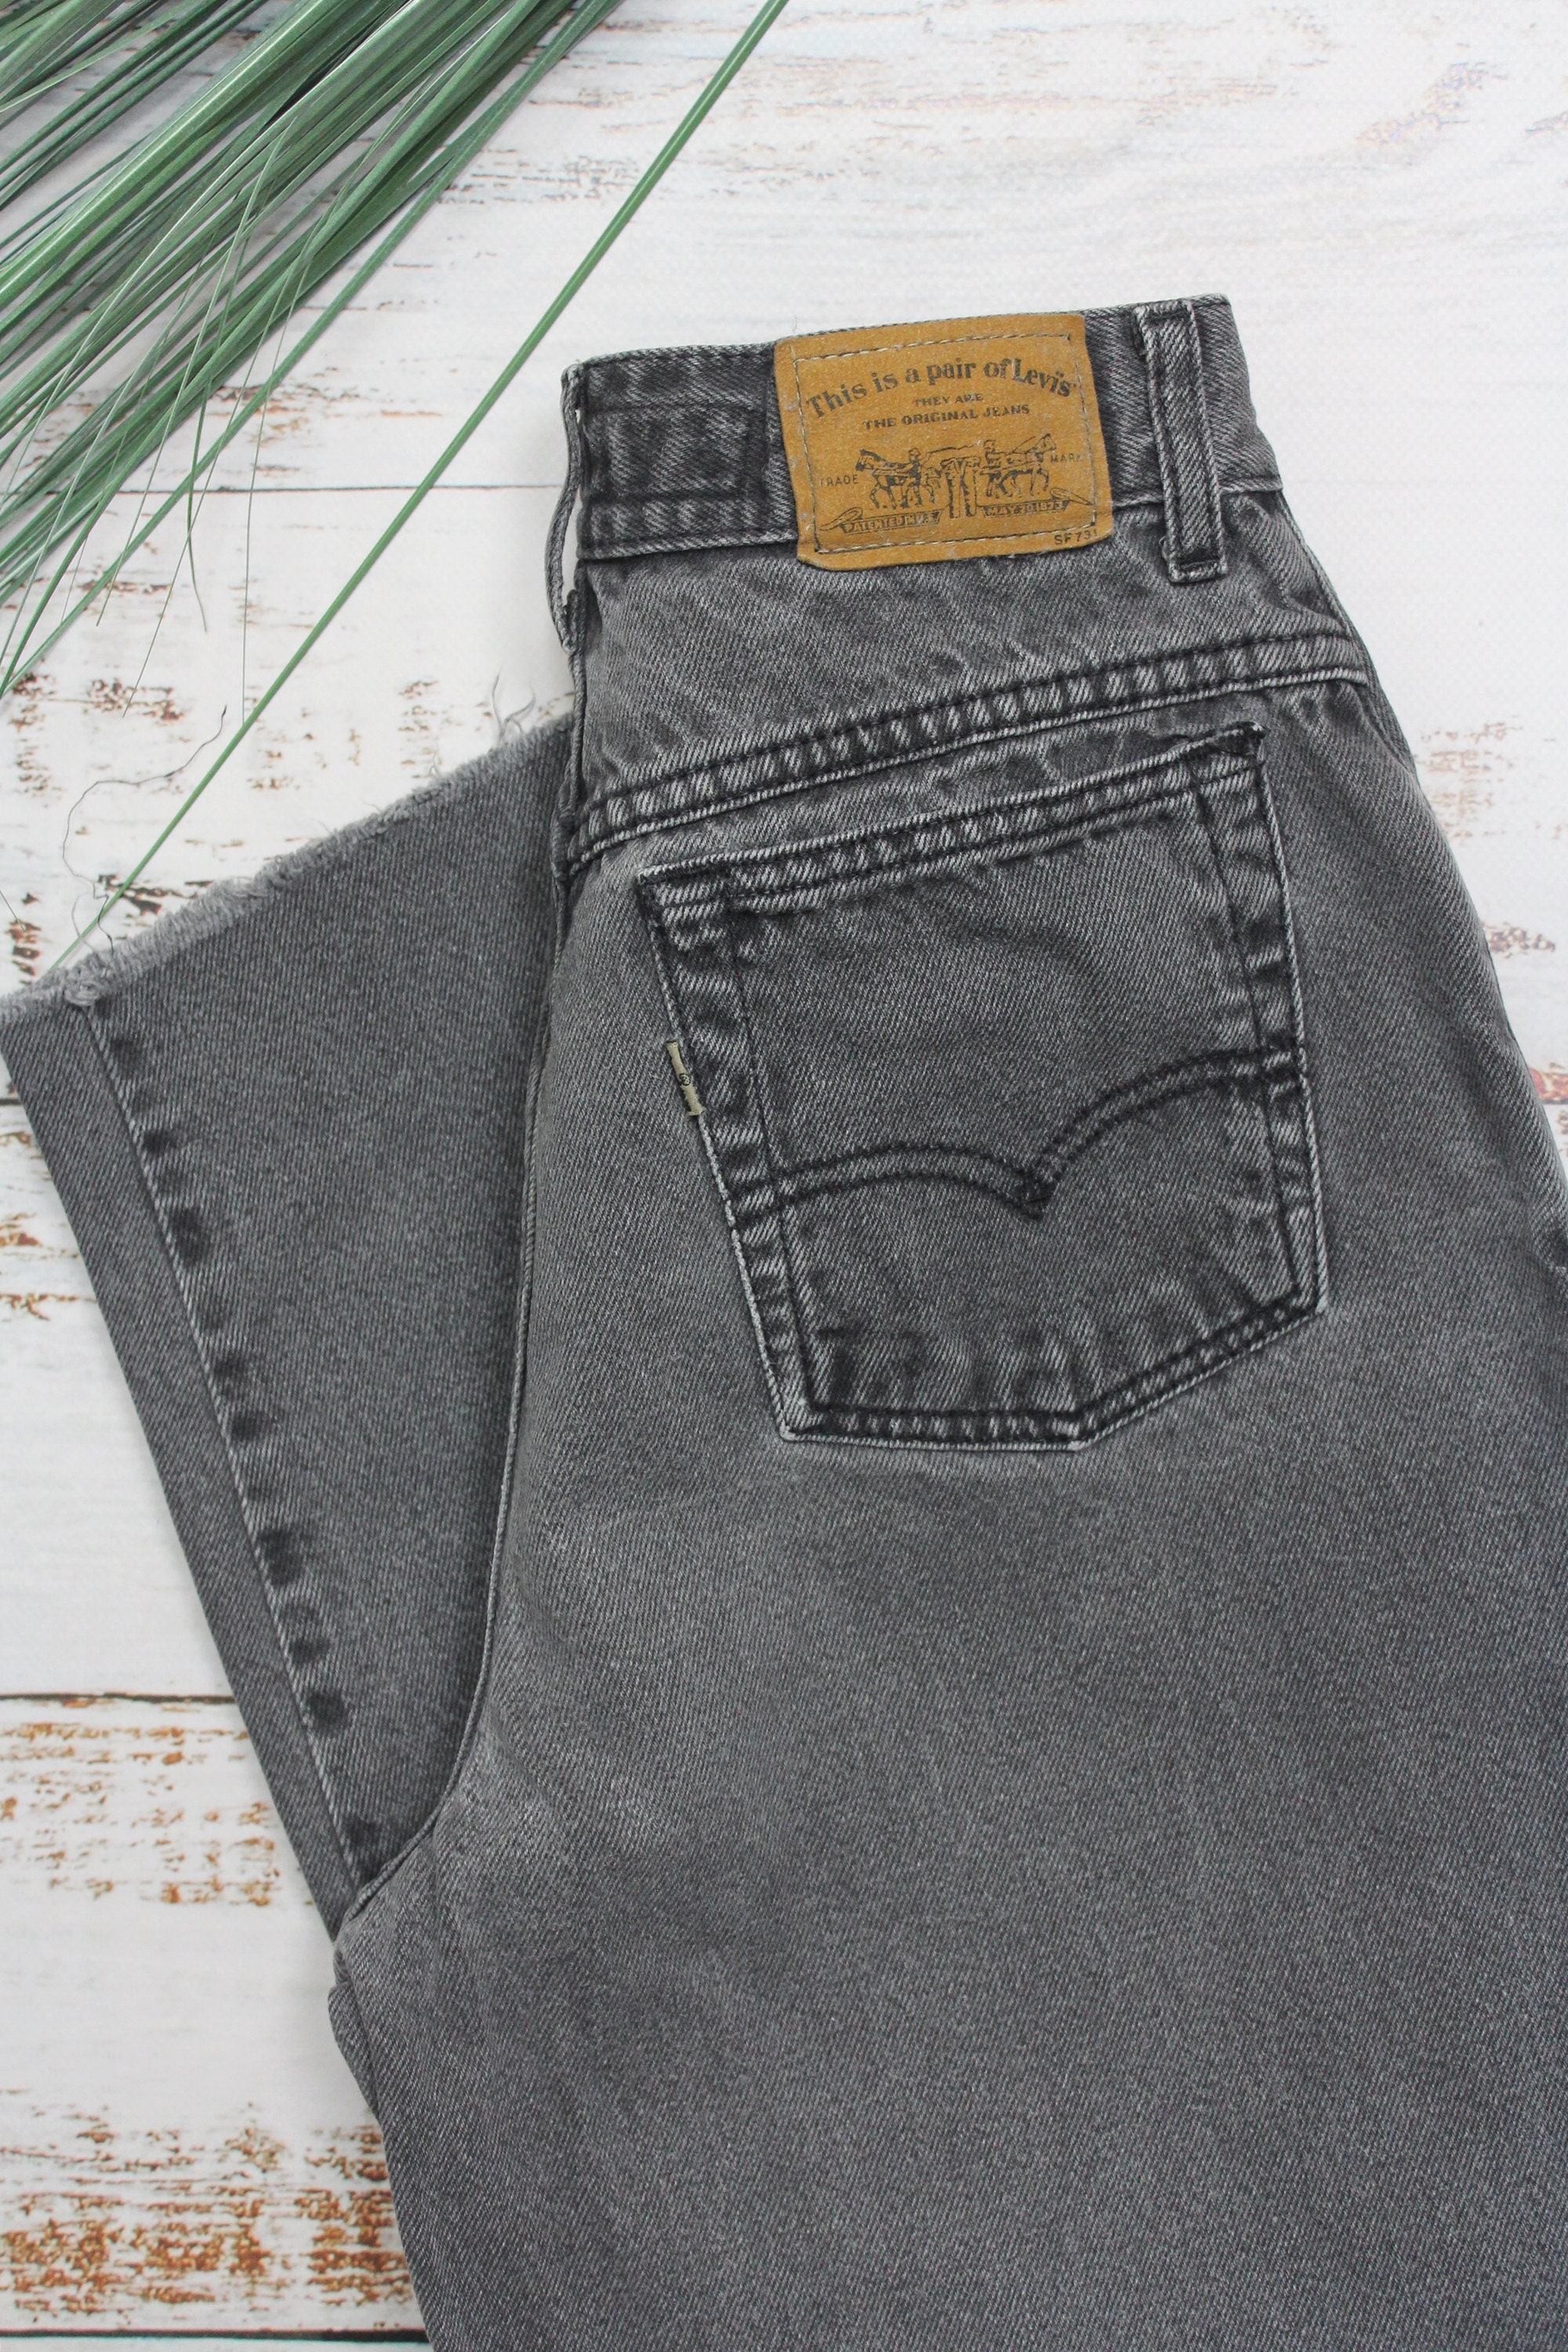 Levi's 900 Series Jeans With Brown Tab Vintage 80s/90s - Etsy